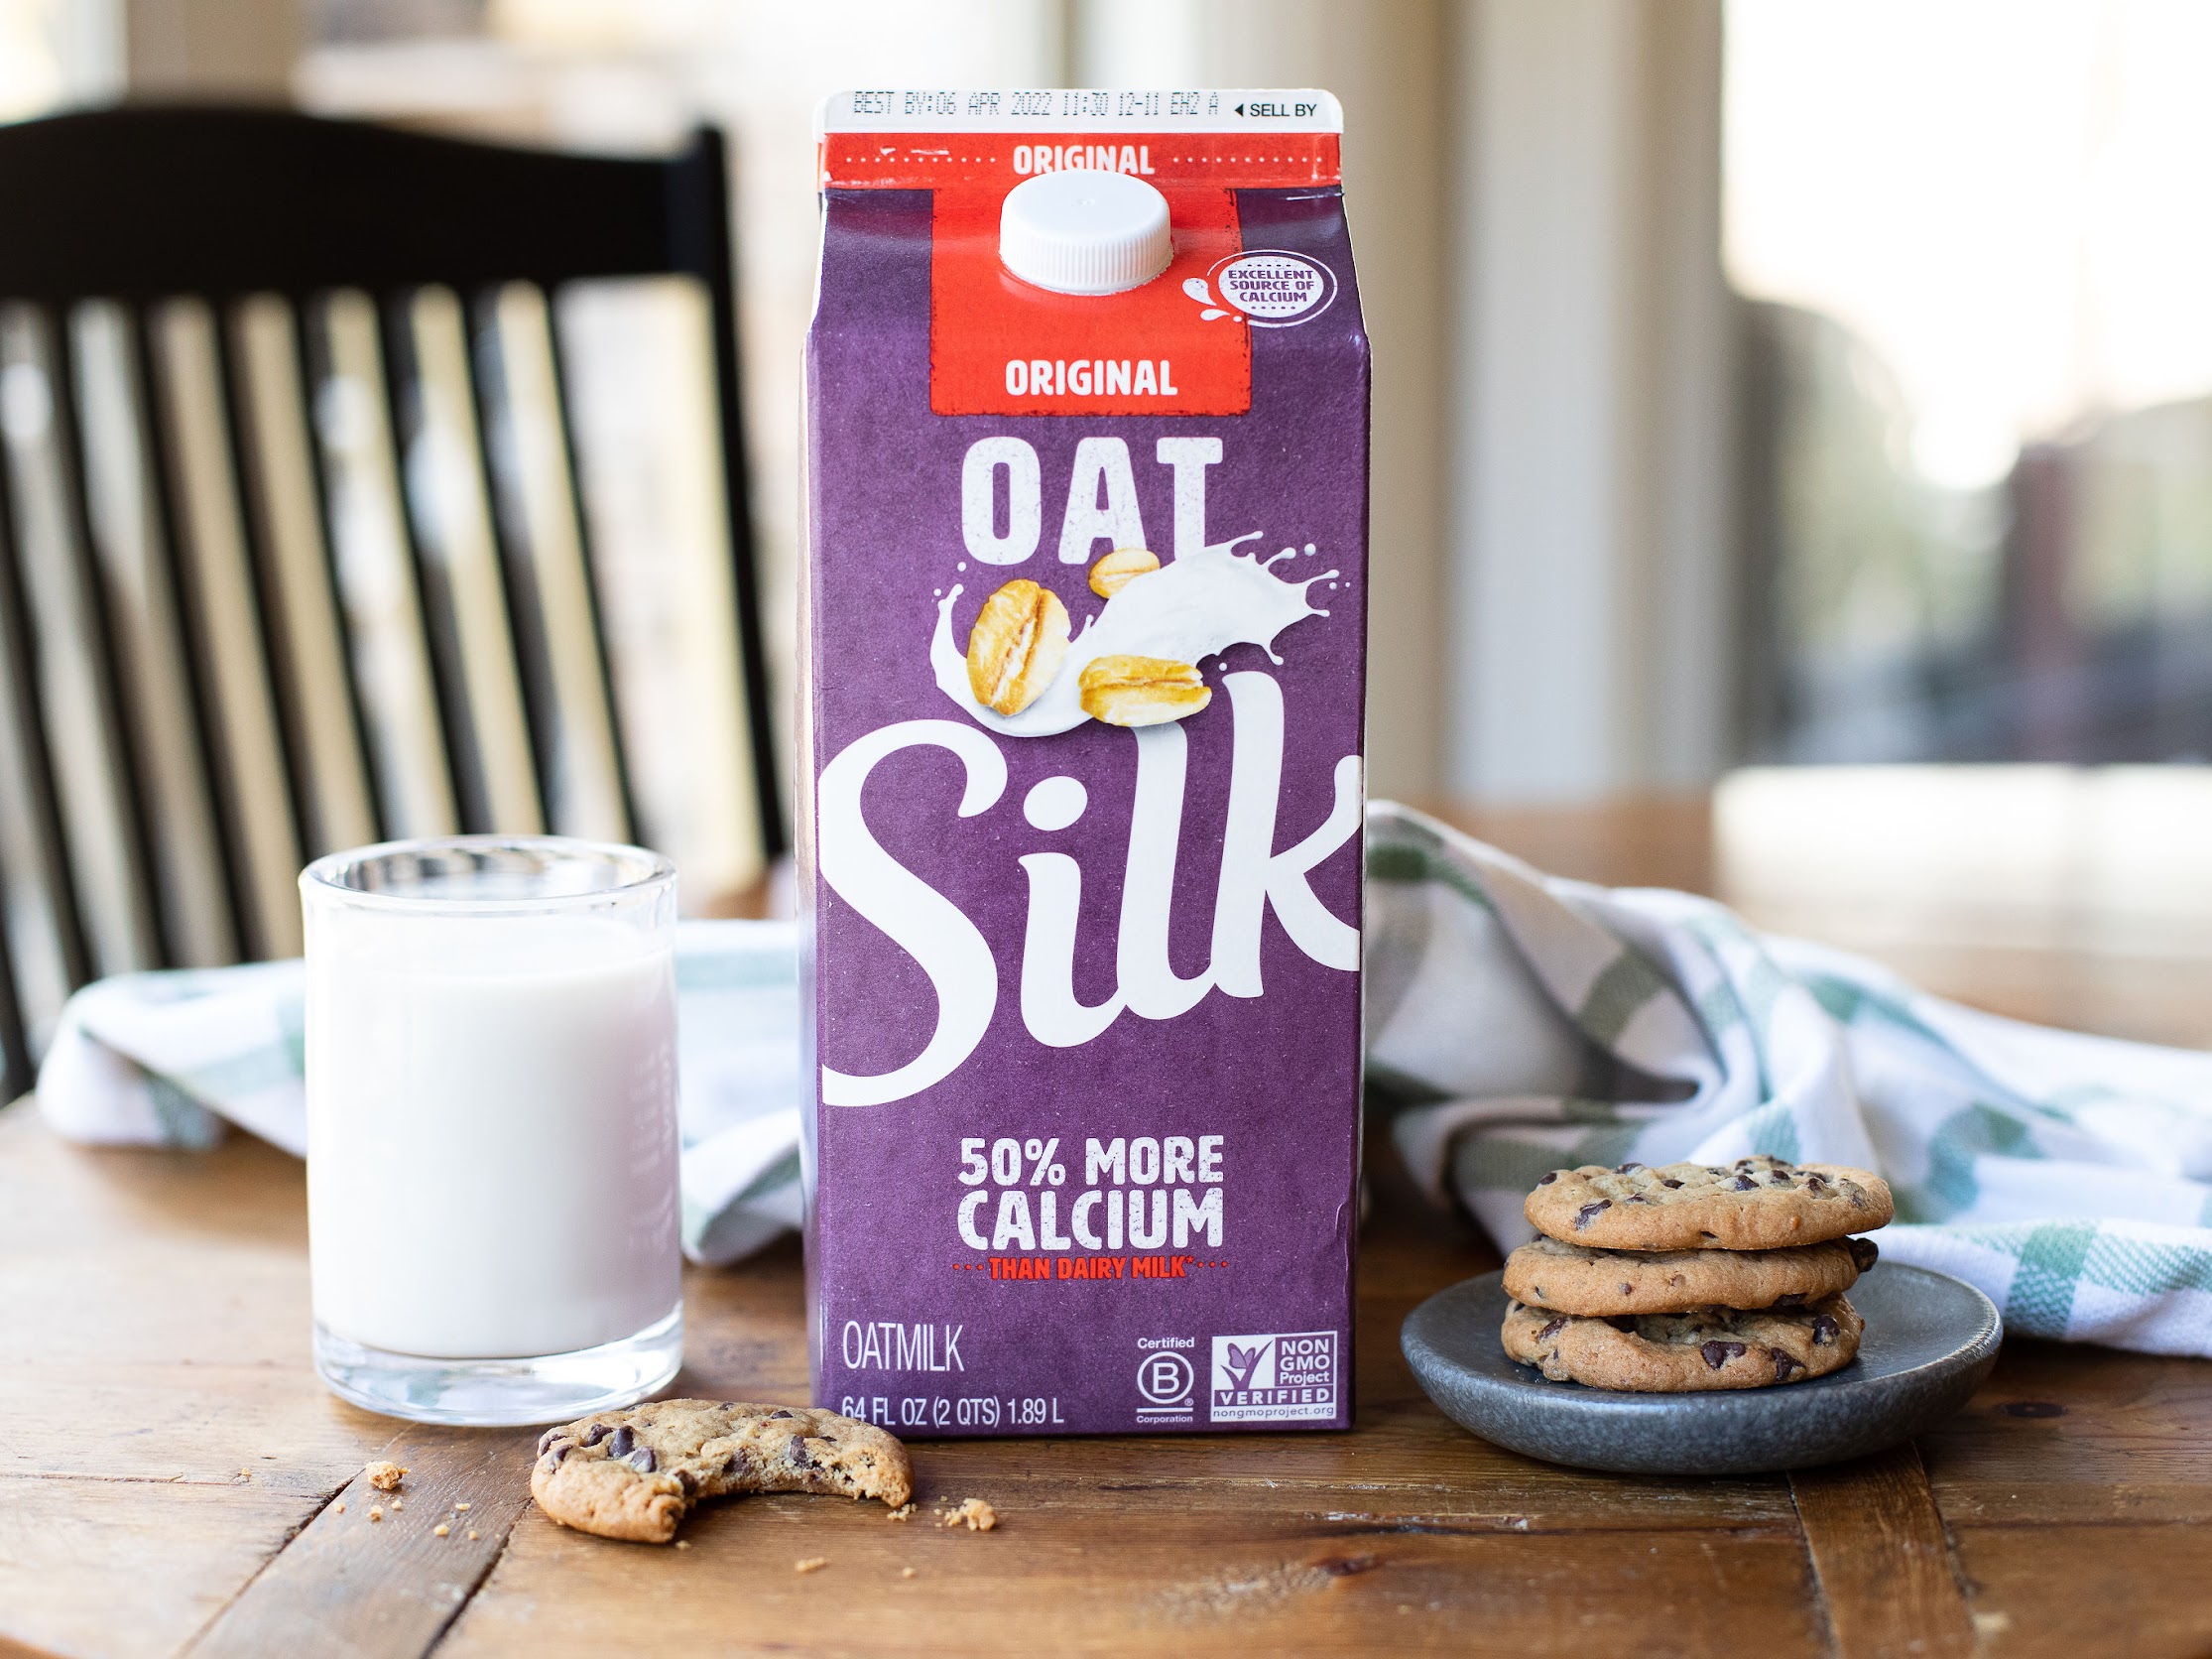 Grab A Great Deal On Smooth And Creamy Silk Oatmilk - Just $1 At Publix! on I Heart Publix